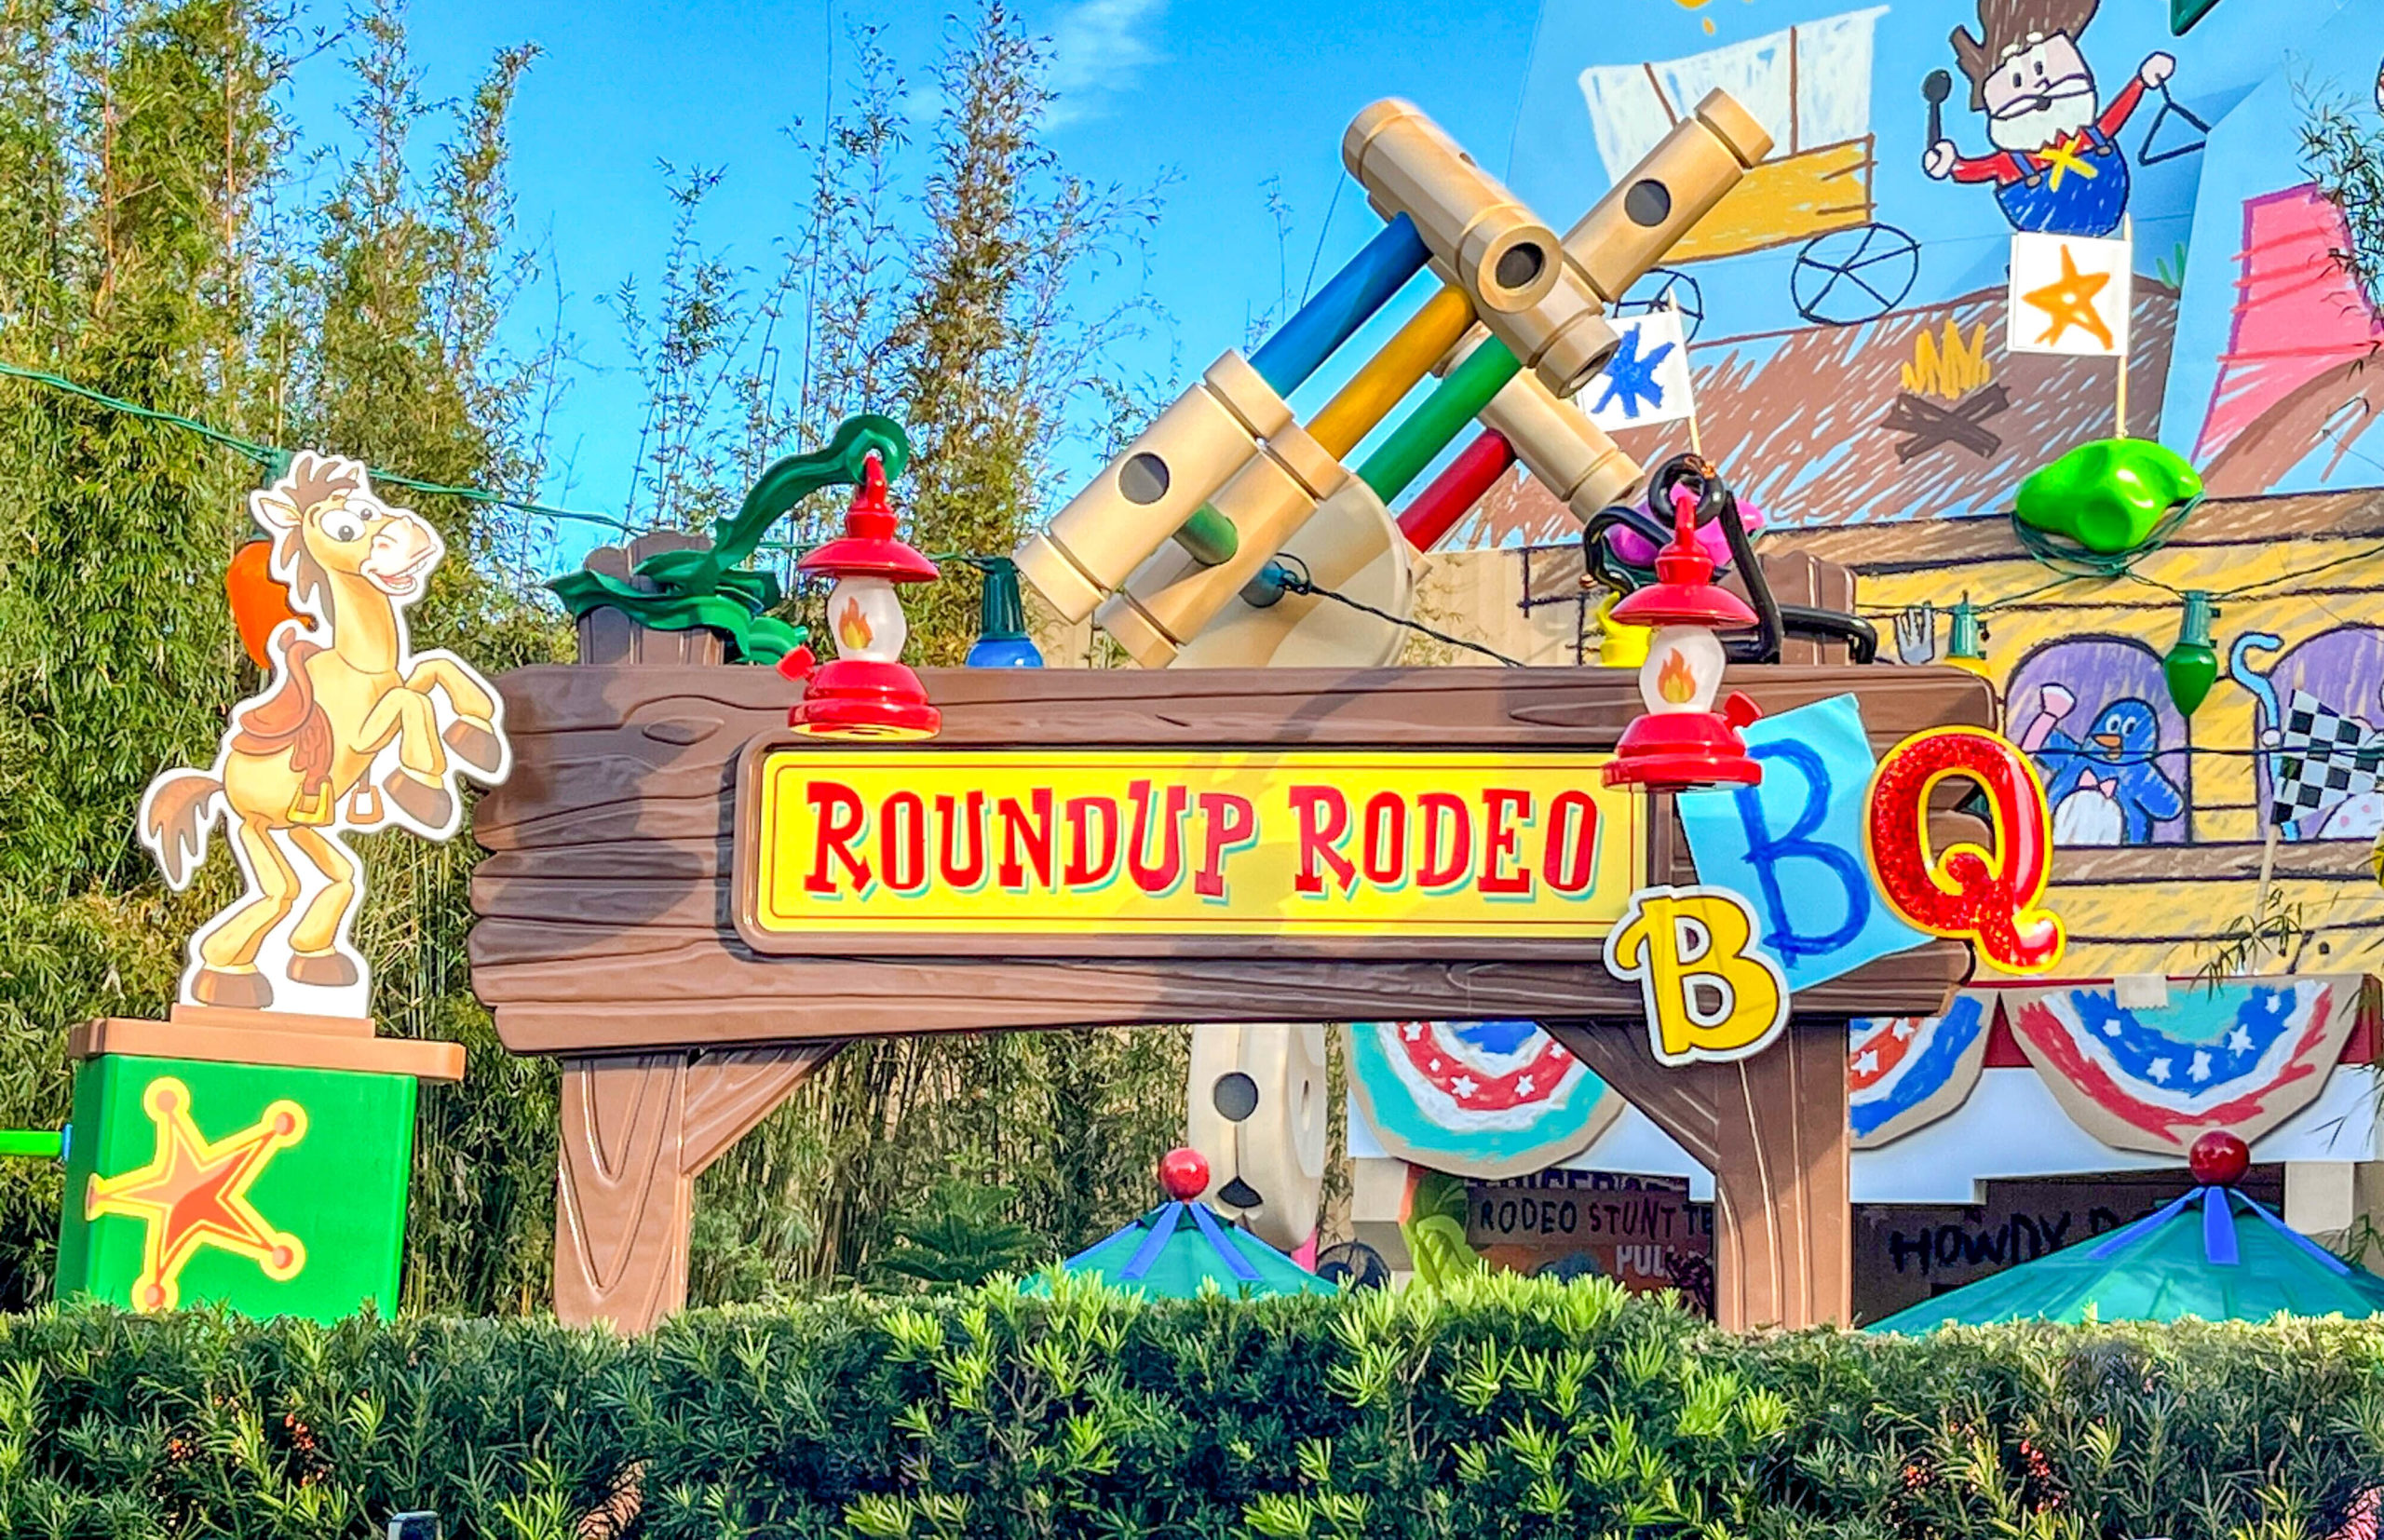 Rodeo Roundup BBQ Sign Revealed at Disney's Hollywood Studios